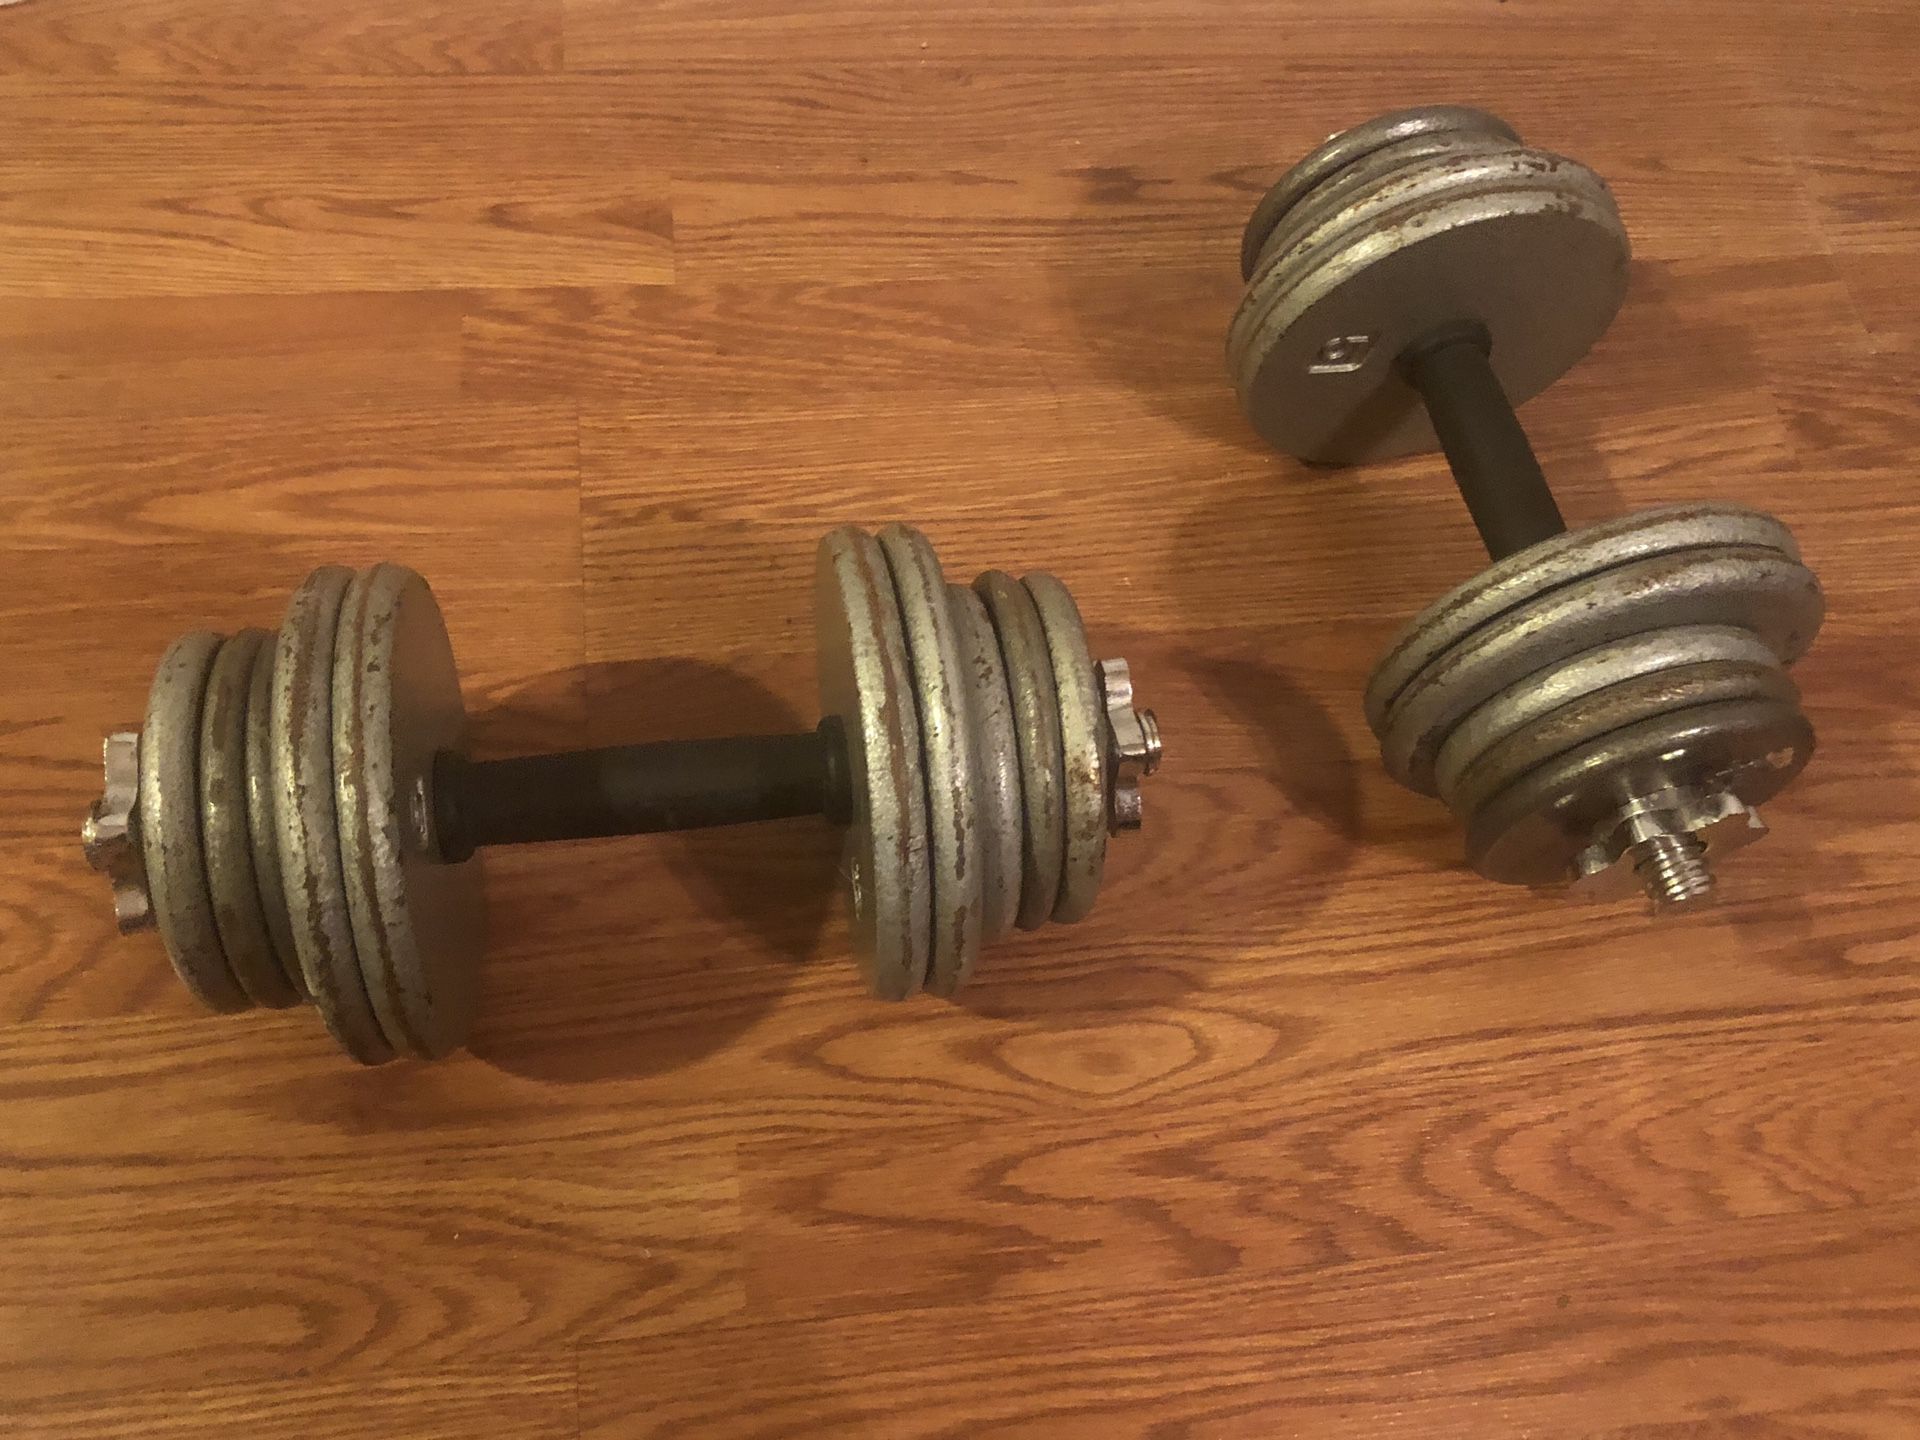 Pair of adjustable dumbbell weights 35lbs each